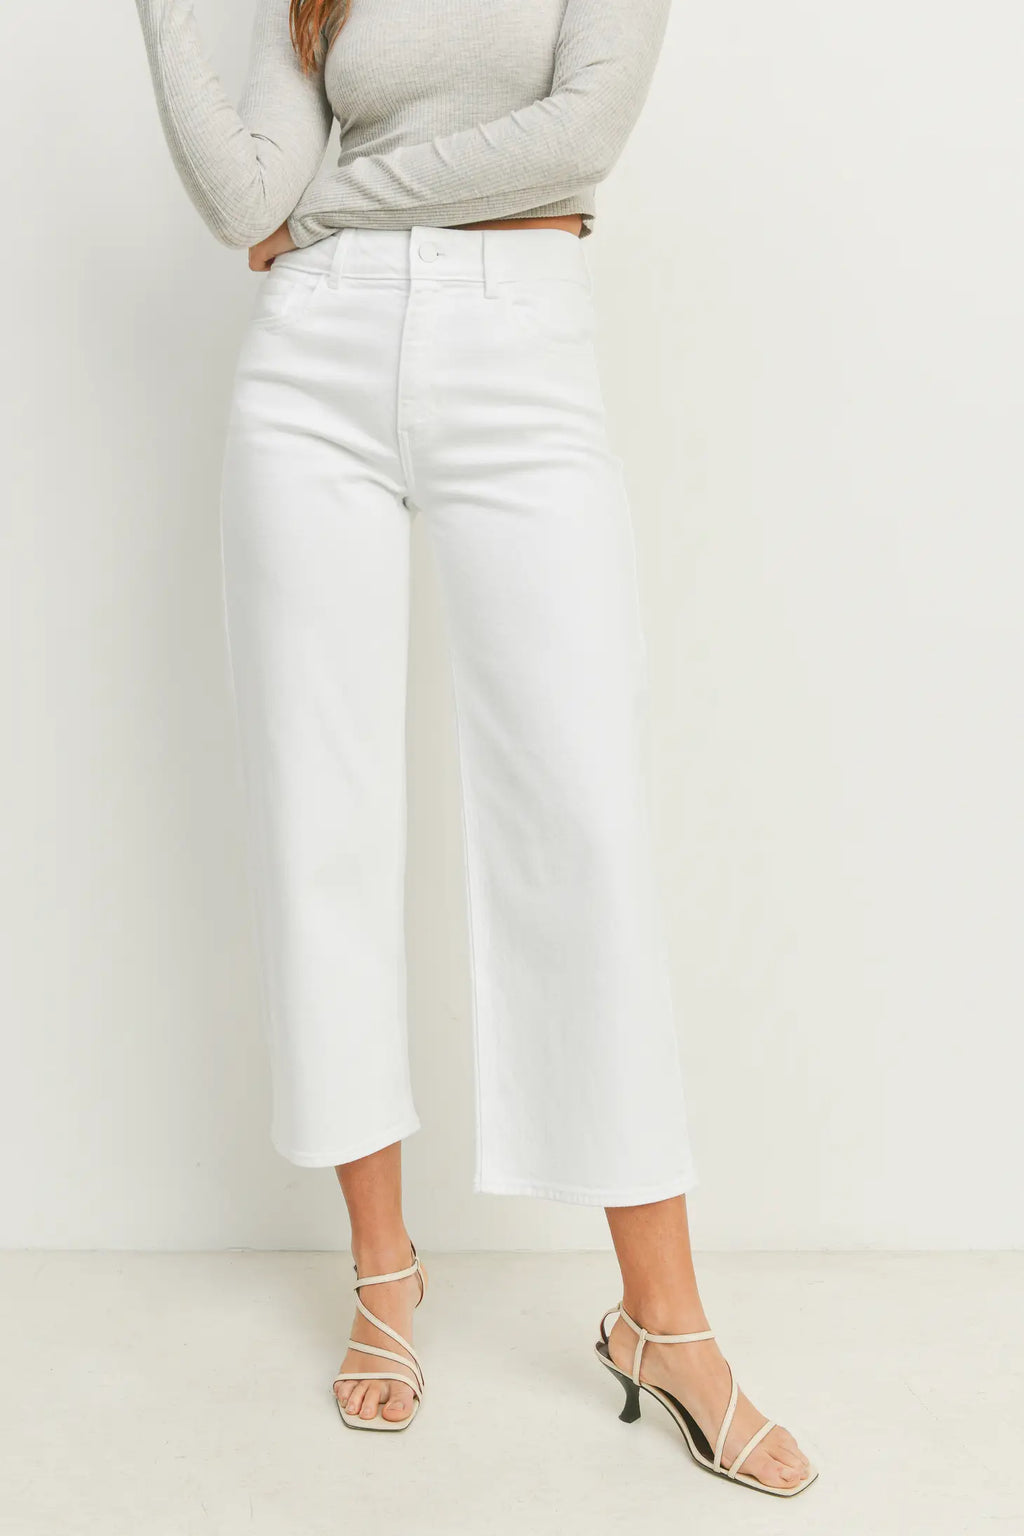 just black denim contemporary wide leg jeans in optic white BP376J-A